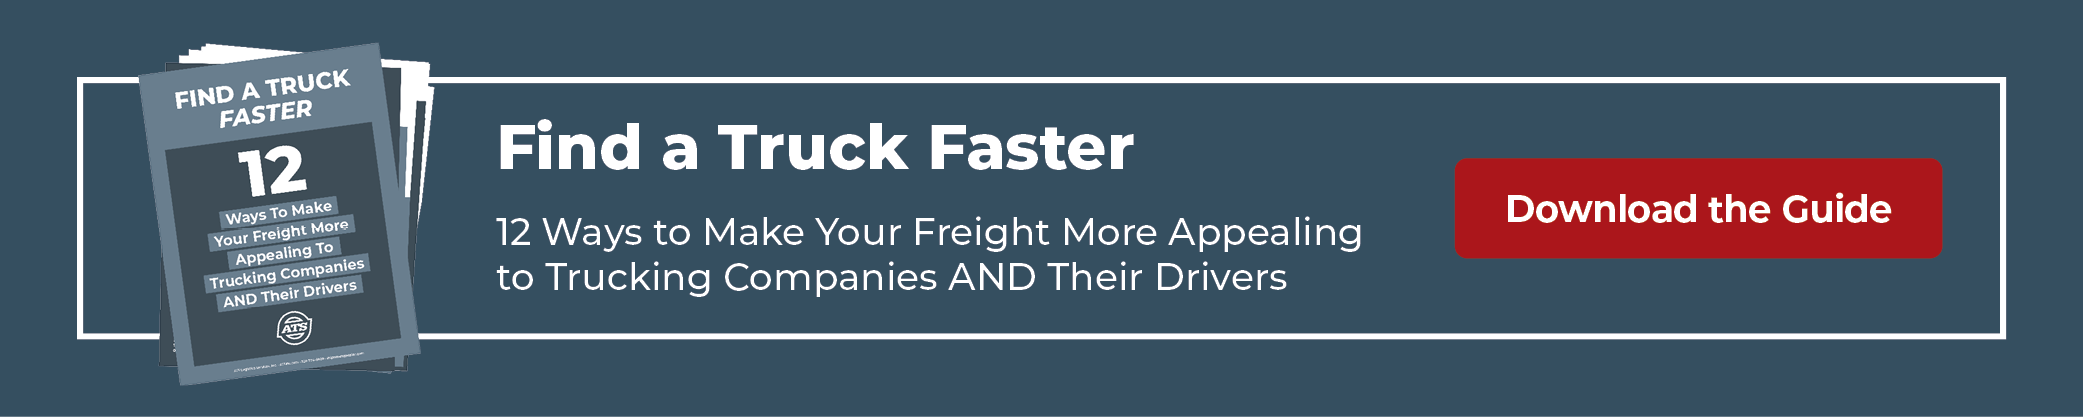 12 Ways to Find a Truck Faster